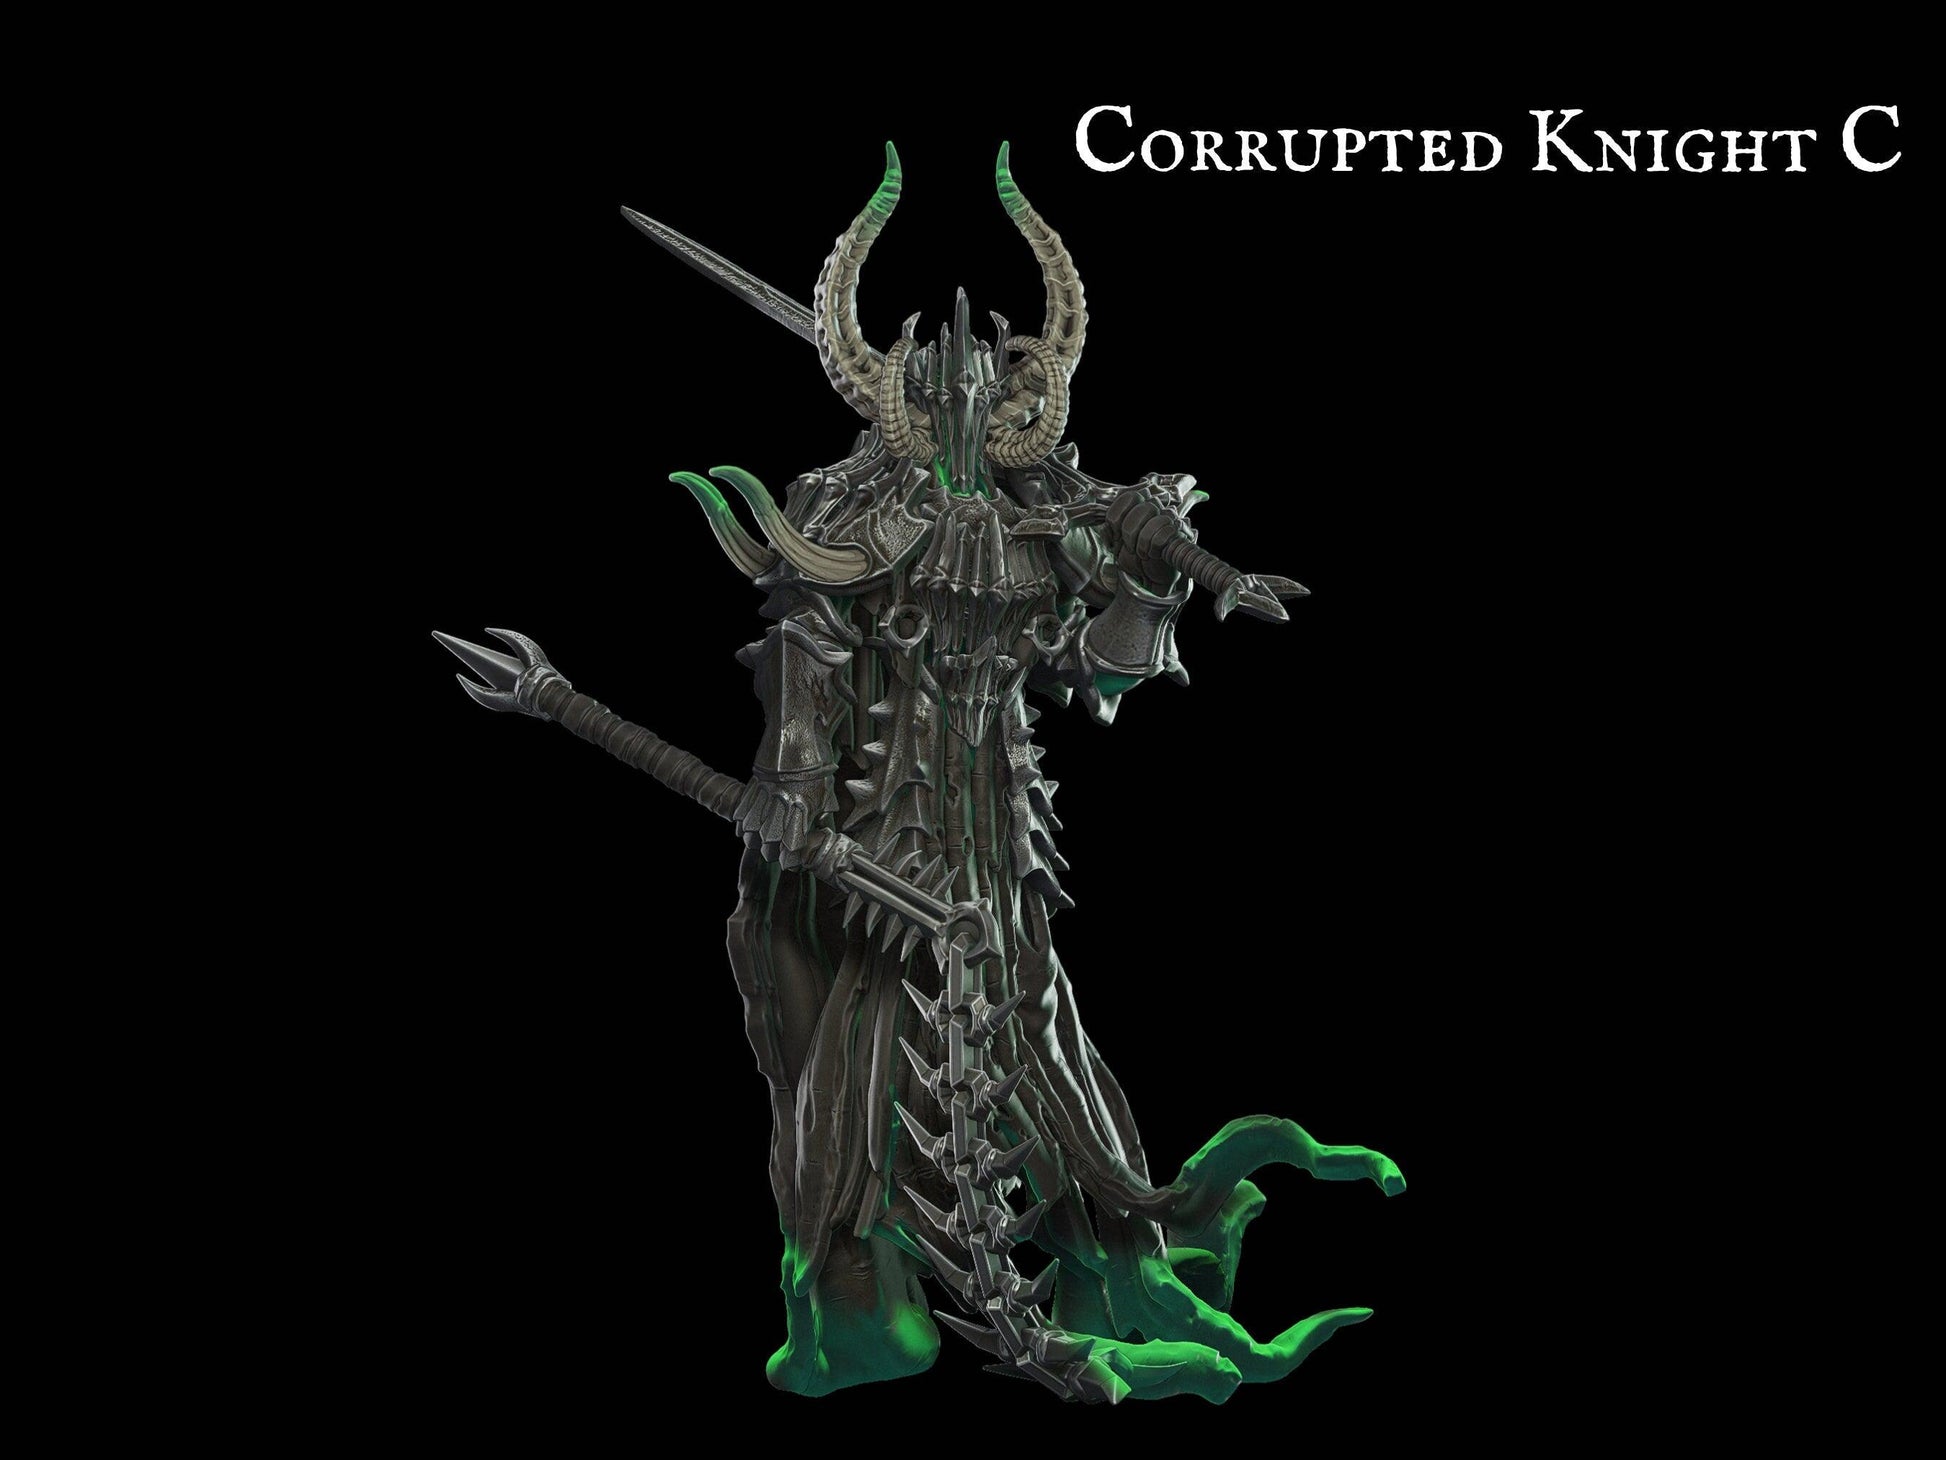 Corrupted Knight Miniature - 28mm scale Tabletop gaming DnD Miniature Dungeons and Dragons dnd 5e dungeon master gift - Plague Miniatures shop for DnD Miniatures